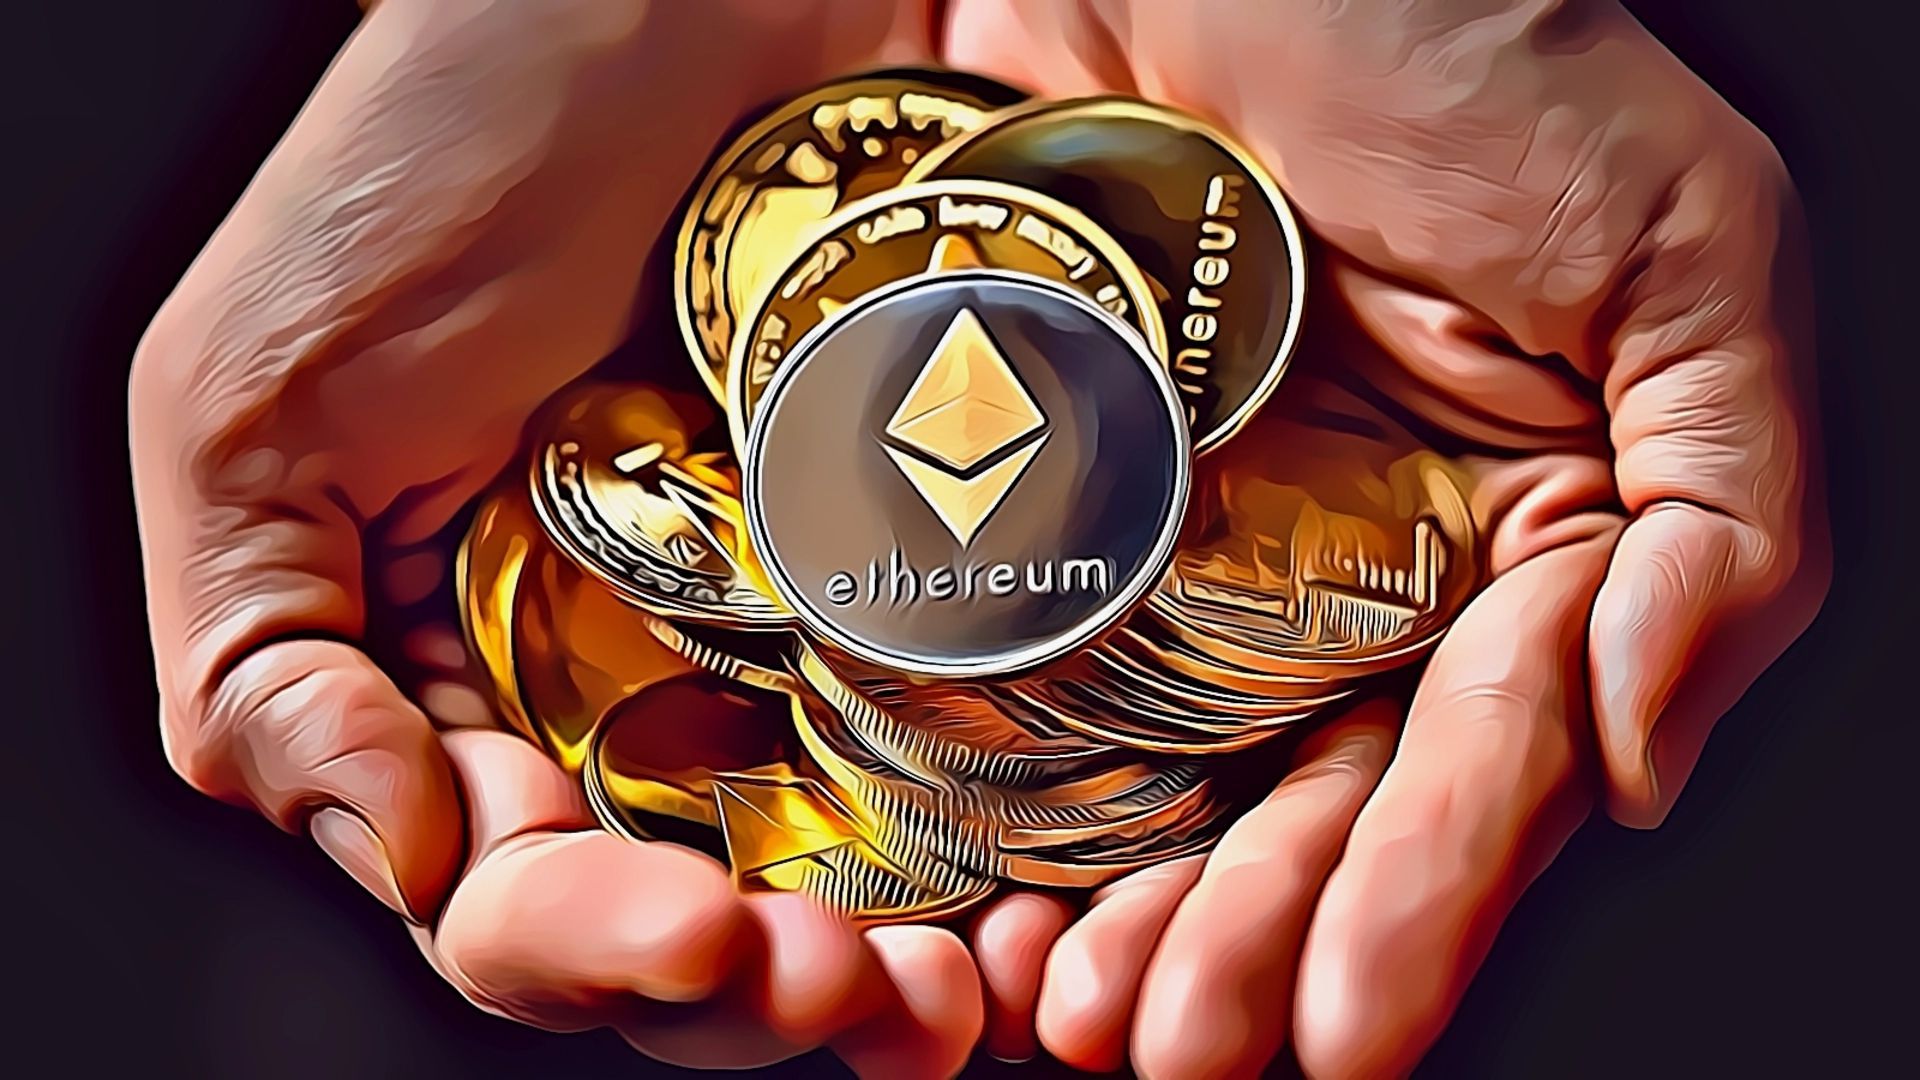 Ethereum Faces Volatility As Prices Fluctuate, Some Notable Whale Sell-off To Monitor 